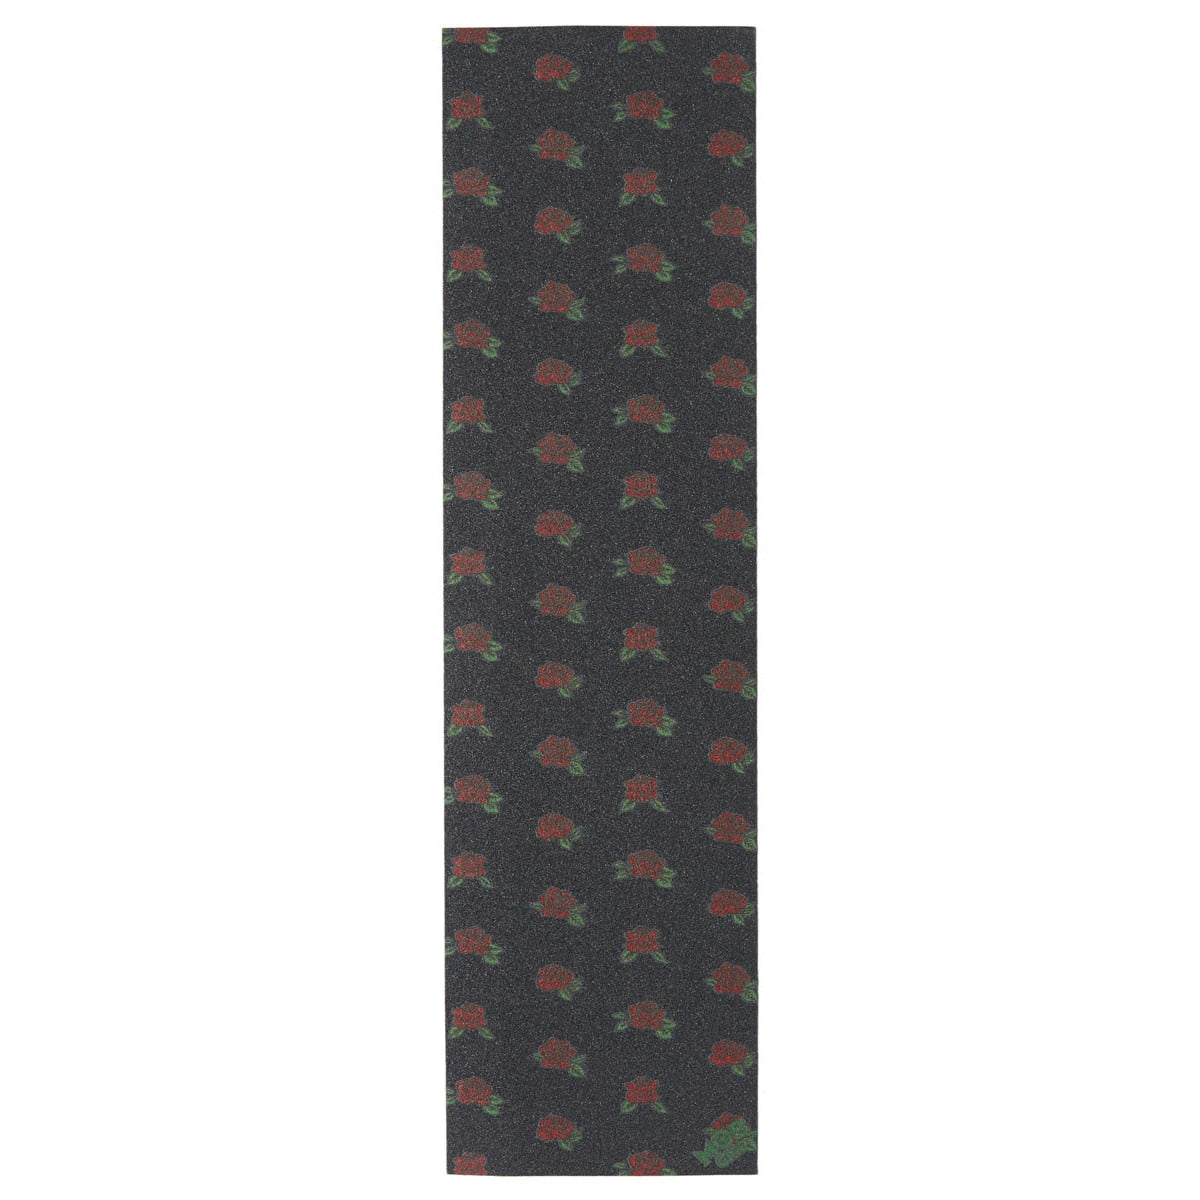 Mob Smell The Rose Skateboard Grip Tape - Small Roses